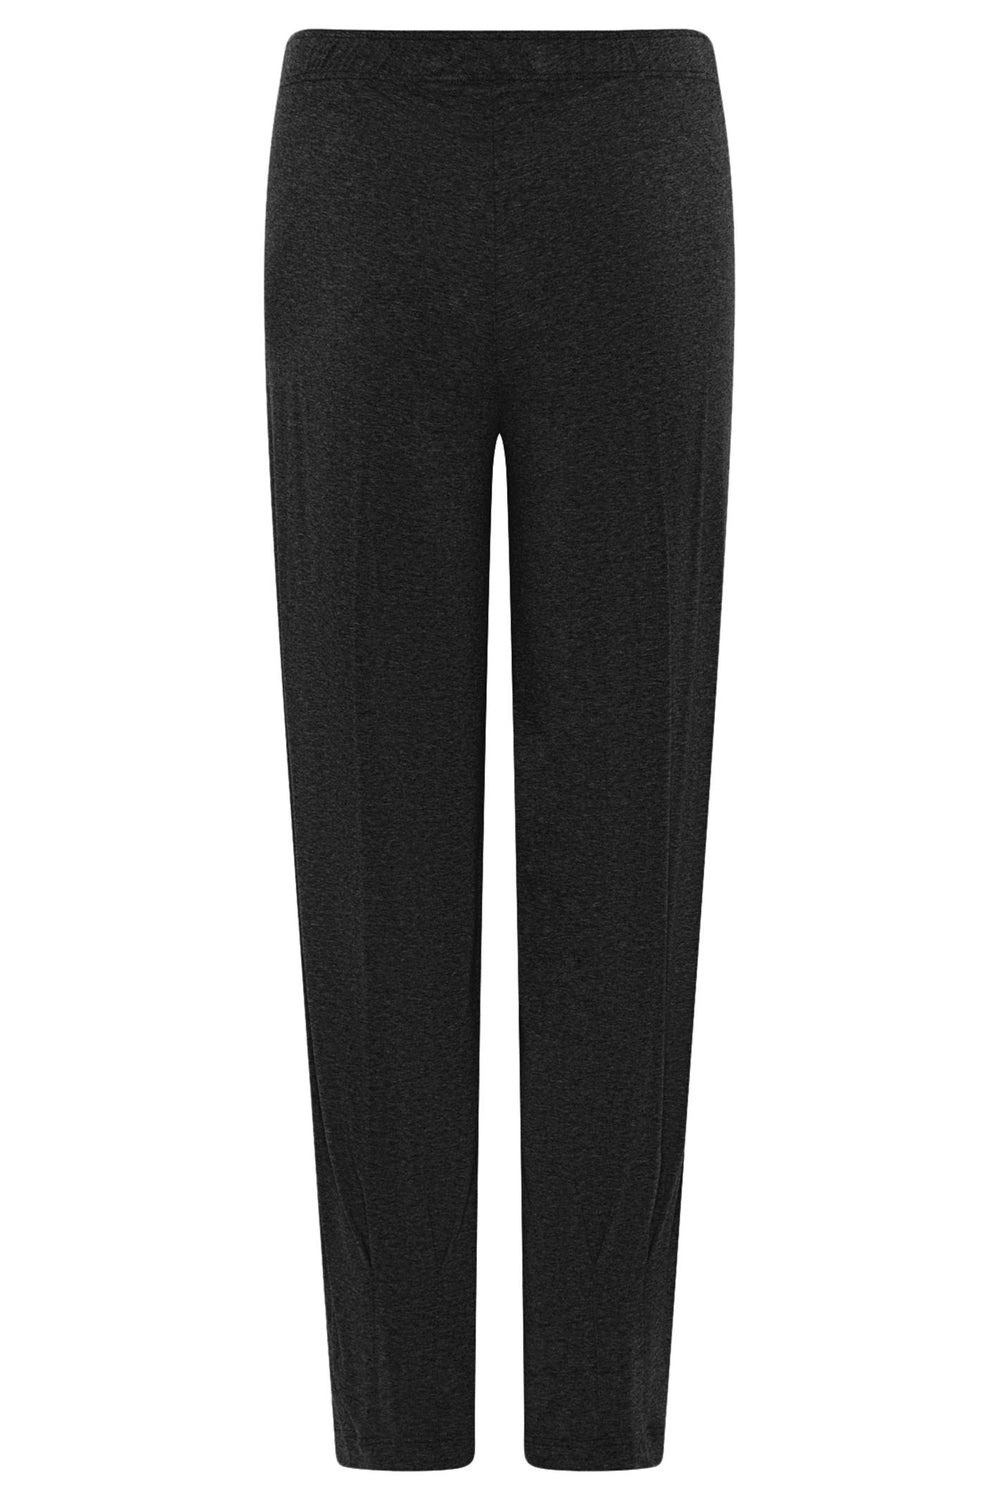 Noen 81839 2428 90 Black Pull-On Stretch Trousers - Dotique